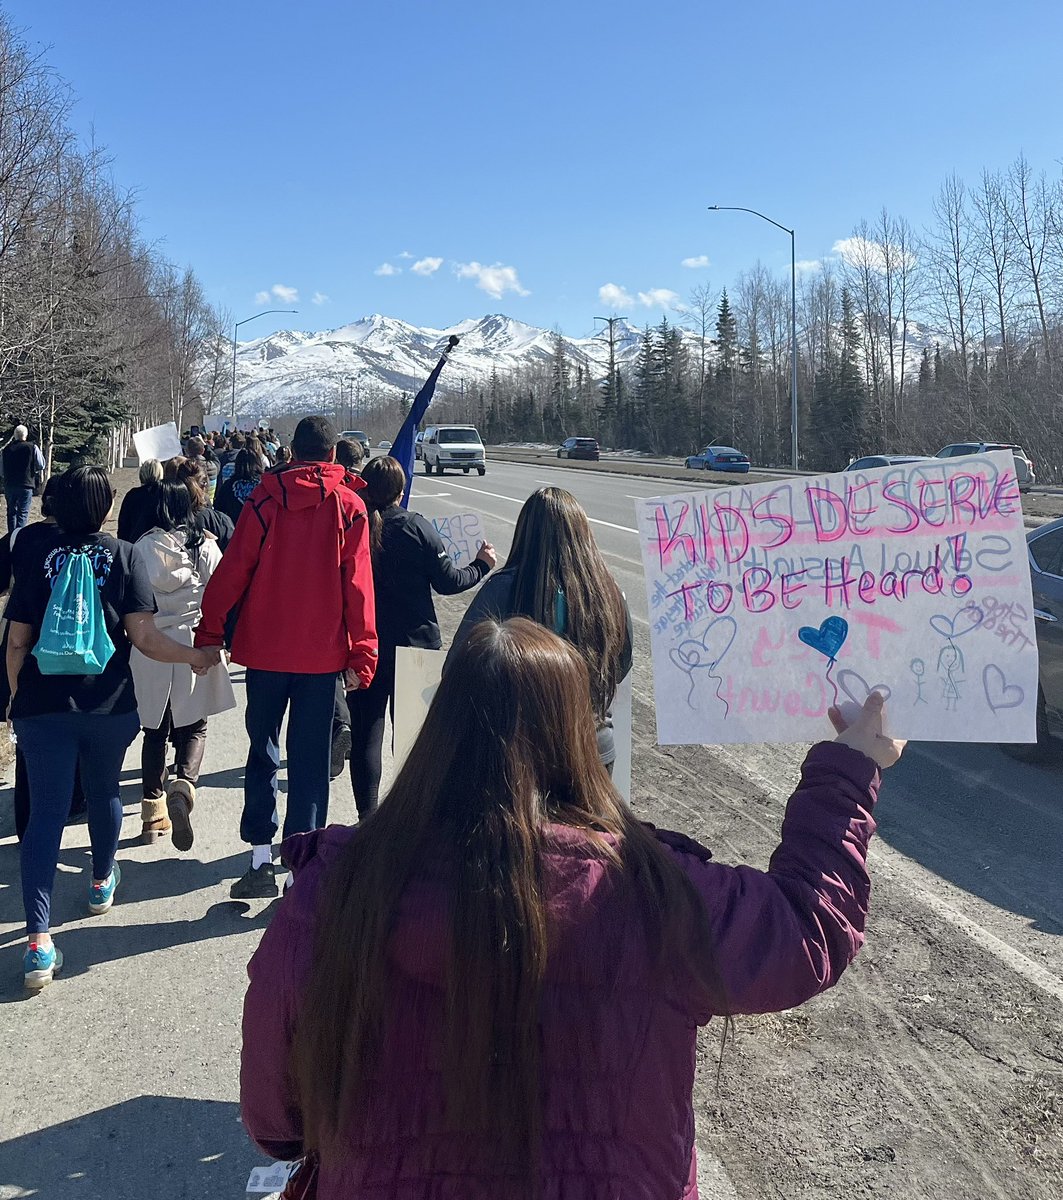 We joined our partners at the @SCFinsider Child Abuse & Sexual Assault Awarness Month observance & walk today. Our MMIP Coordinator Ingrid Goodyear spoke about standing up together to make an impact & reinforced our vow to address violent crime in #Alaska. Thanks for having us!